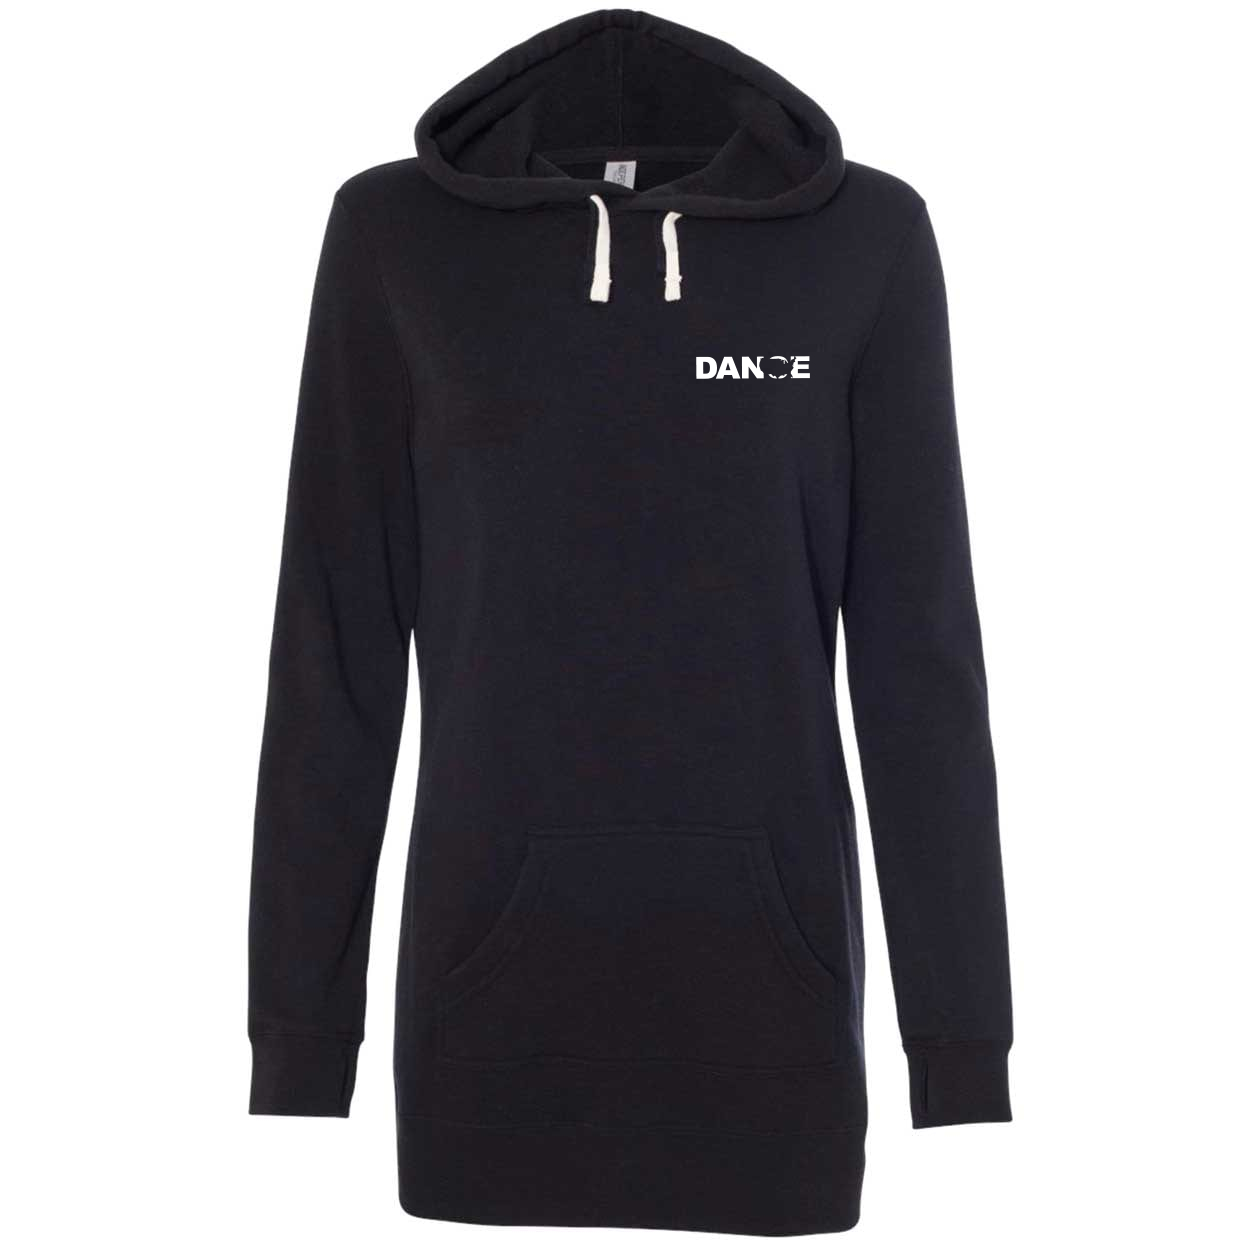 Dance United States Night Out Womens Pullover Hooded Sweatshirt Dress Black (White Logo)